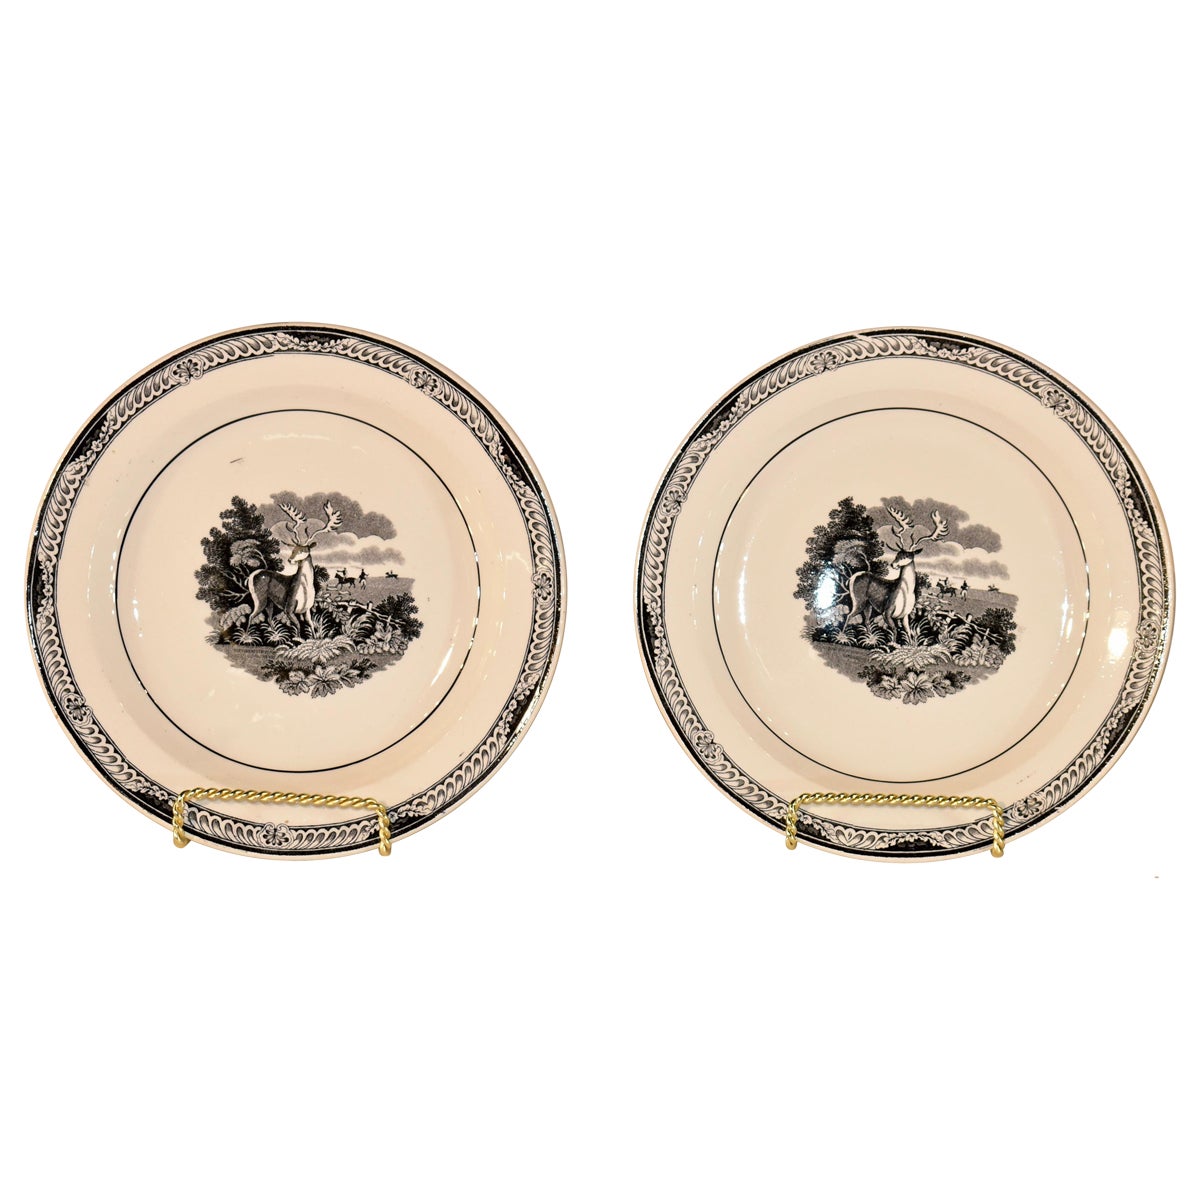 Pair of Early 19th Century Staffordshire Plates with Stags For Sale